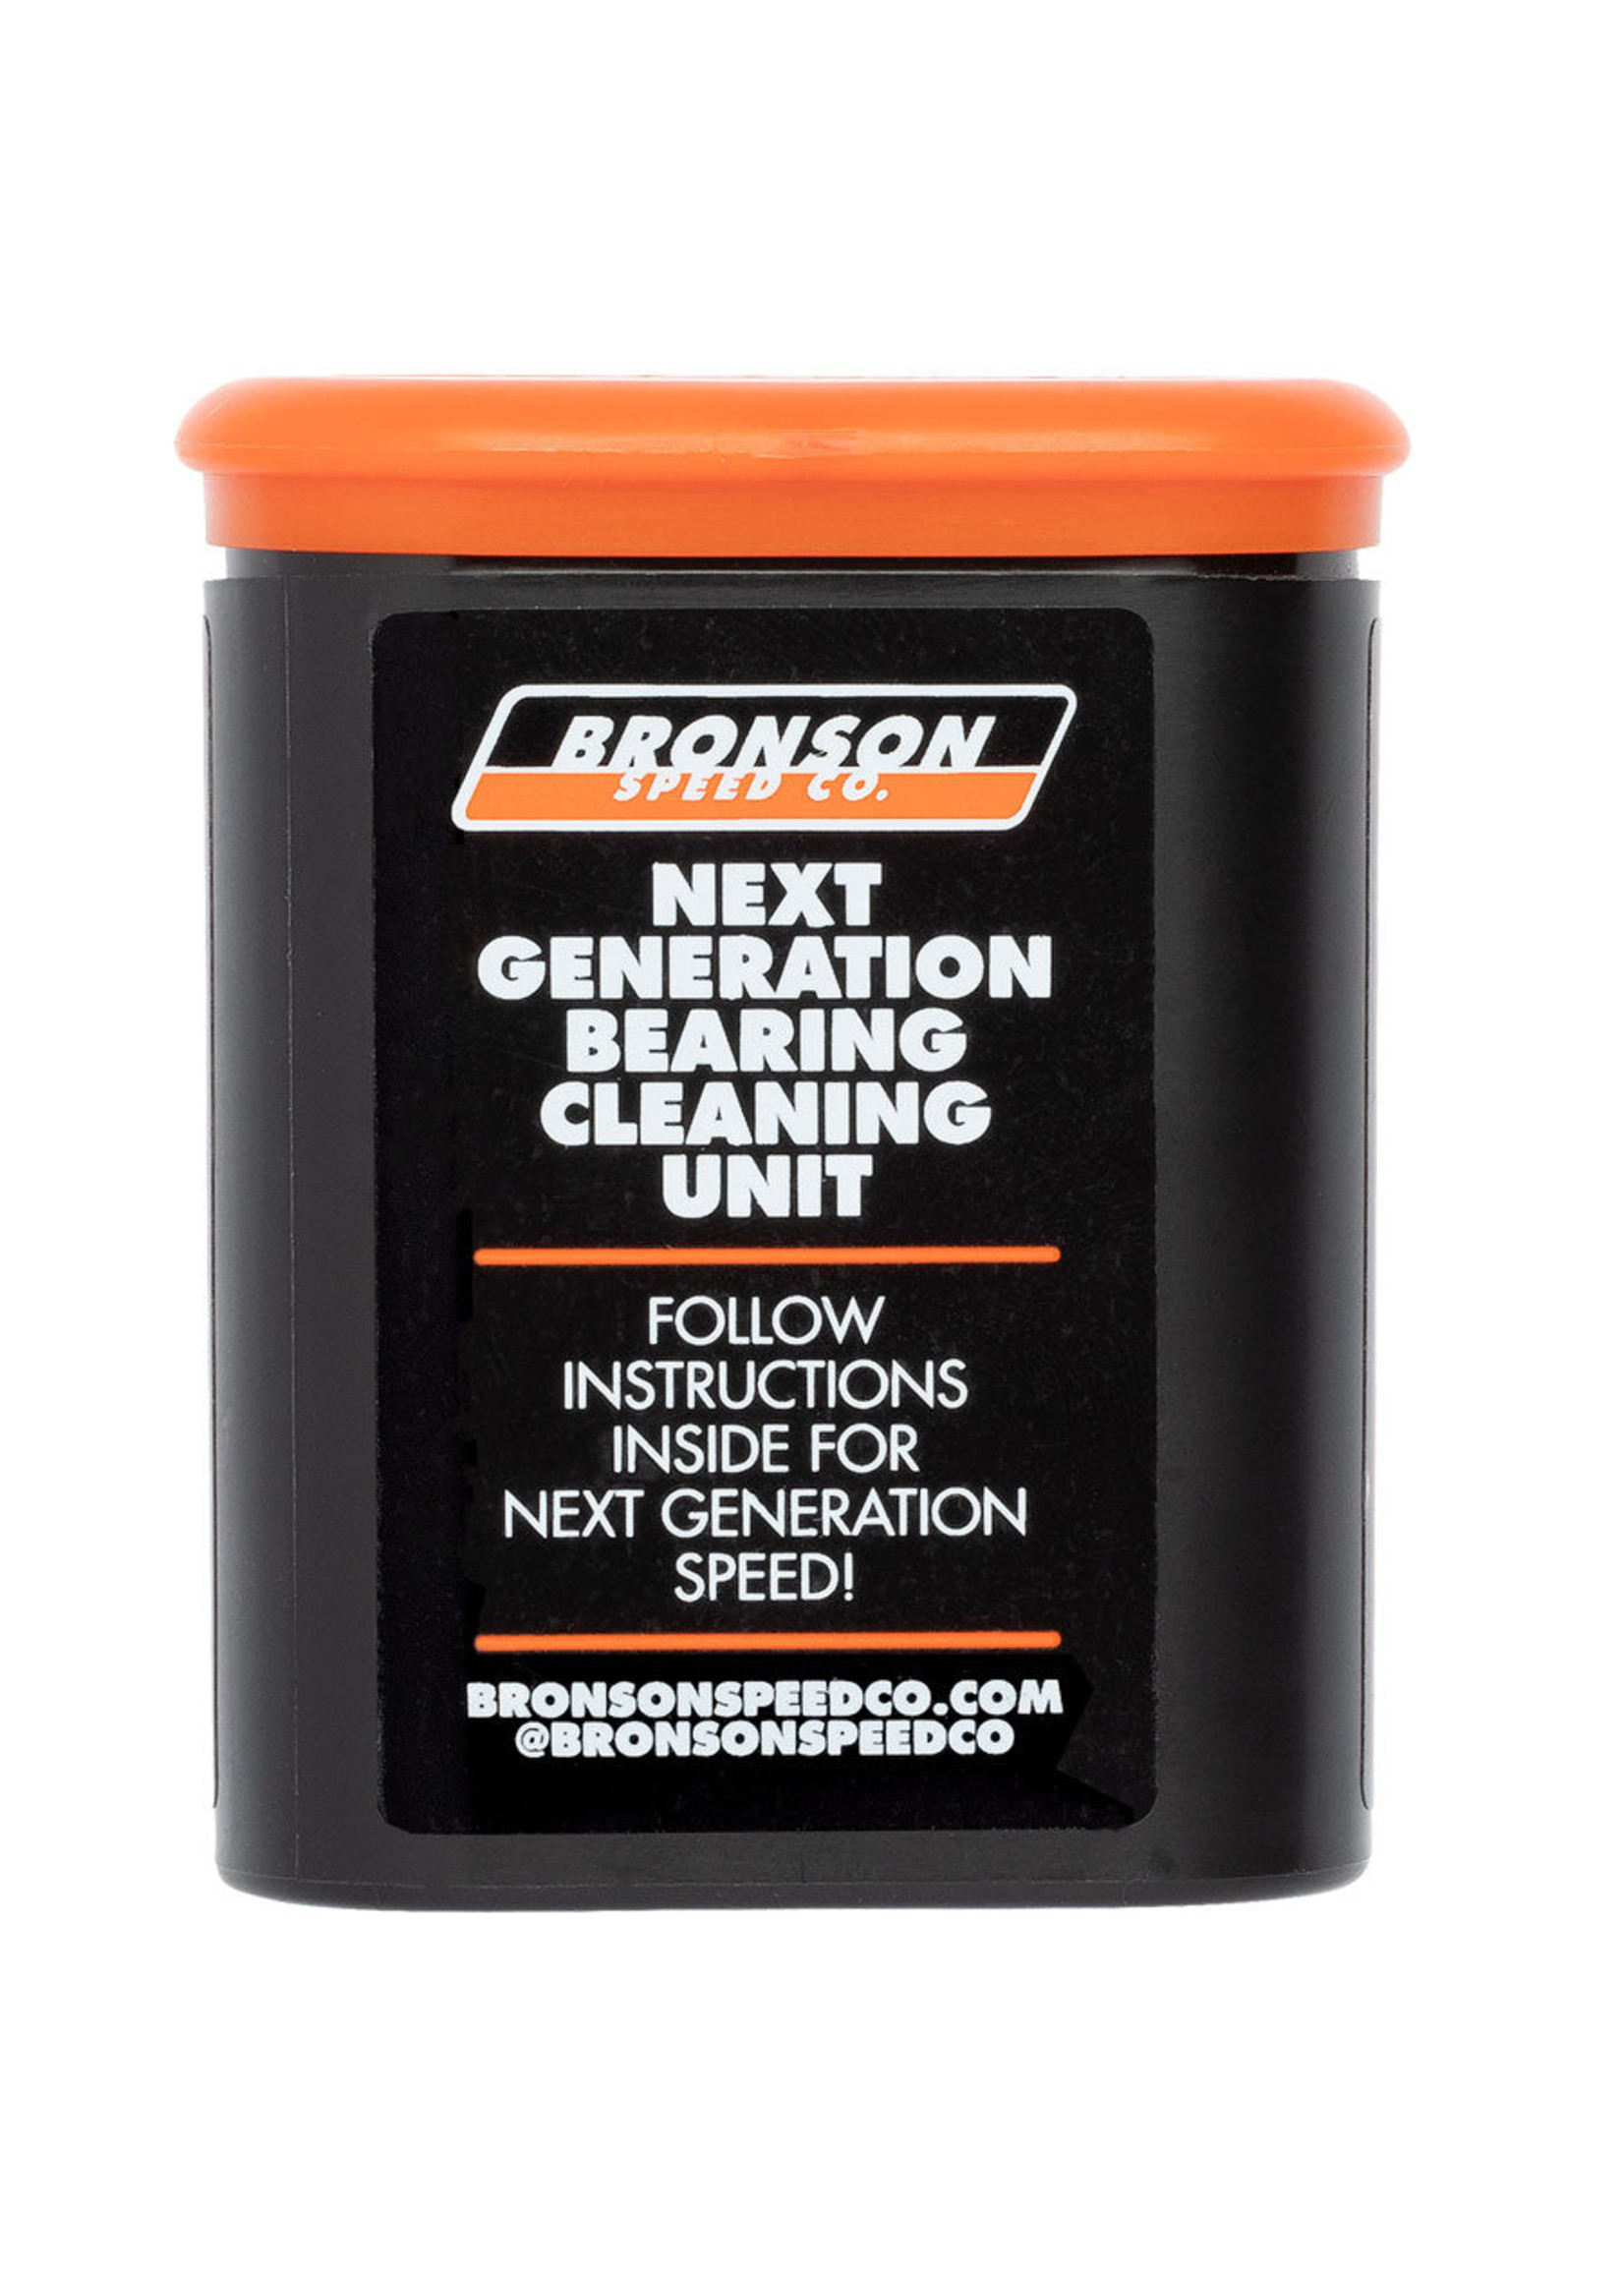 Bronson Speed Co. Bearing Cleaning Unit